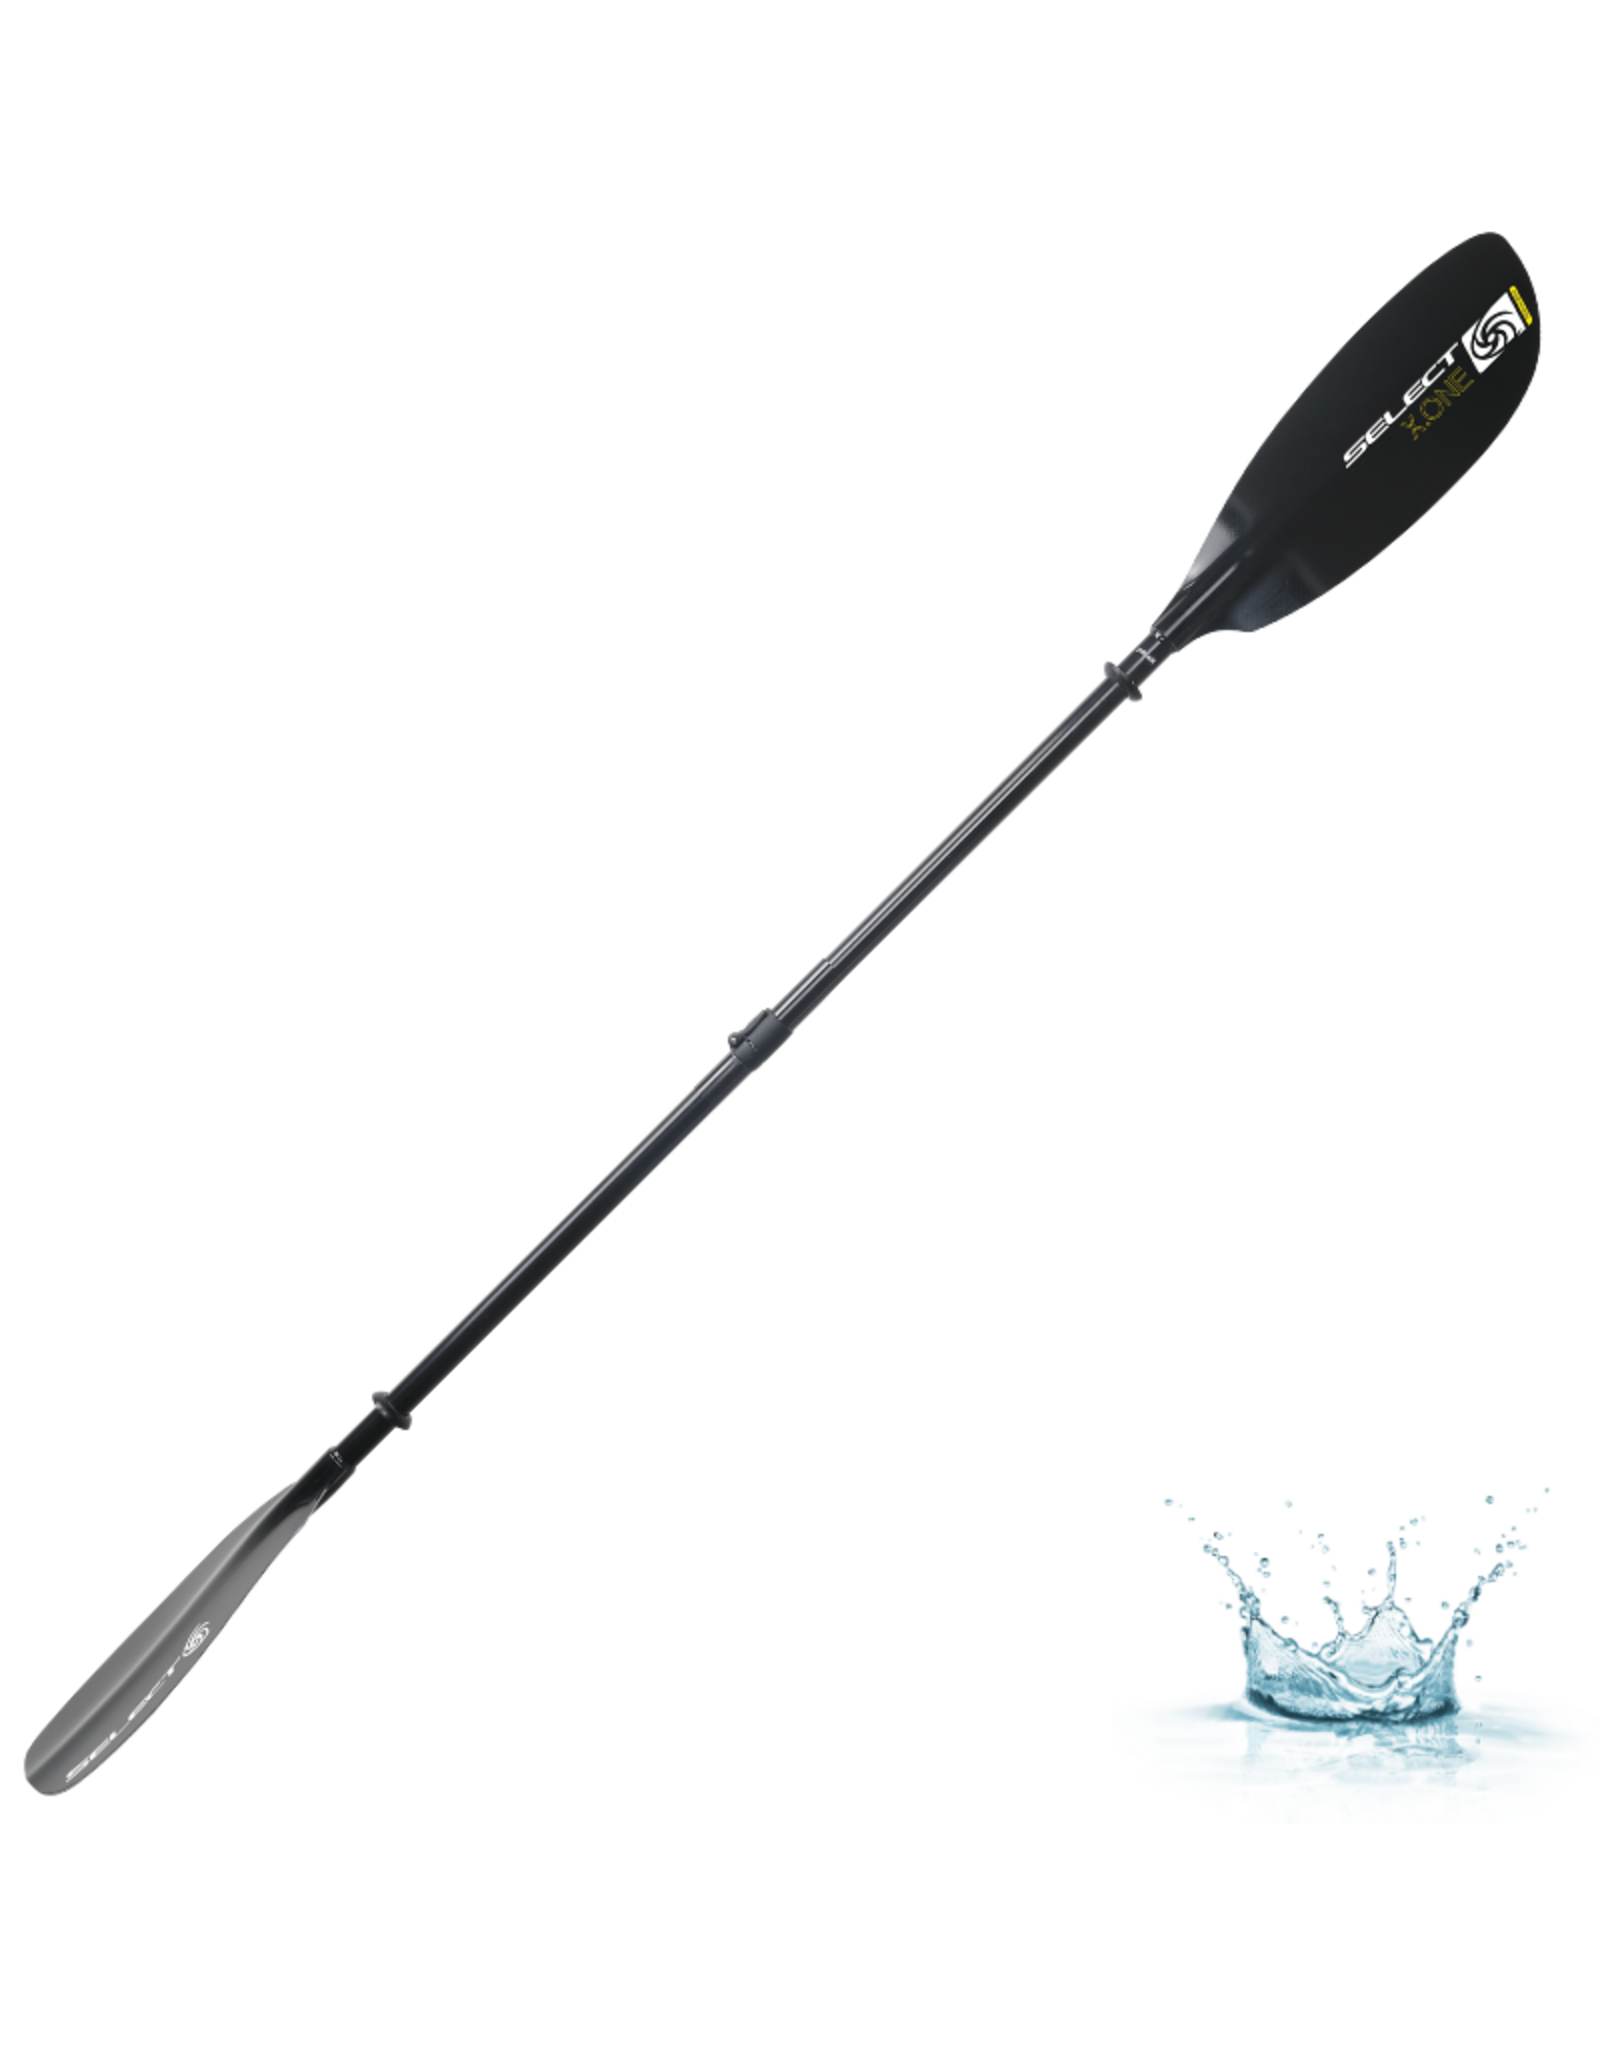 Select Paddles Select Pagaie Warrior (715) Manche Droit